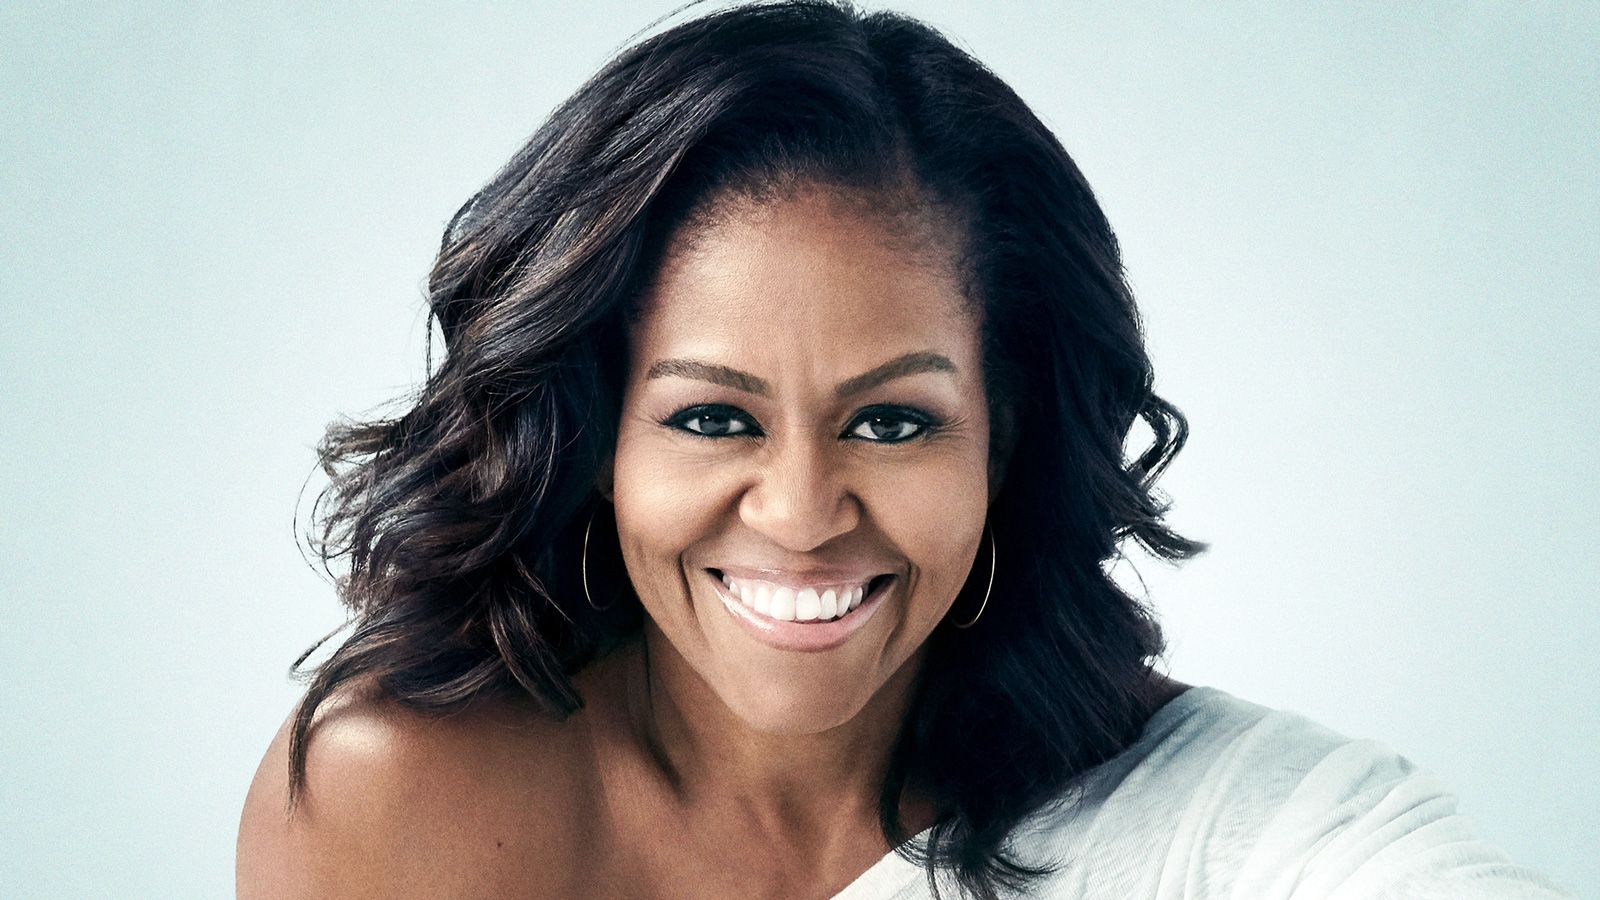 Michelle Obama's career advice for people in jobs they hate